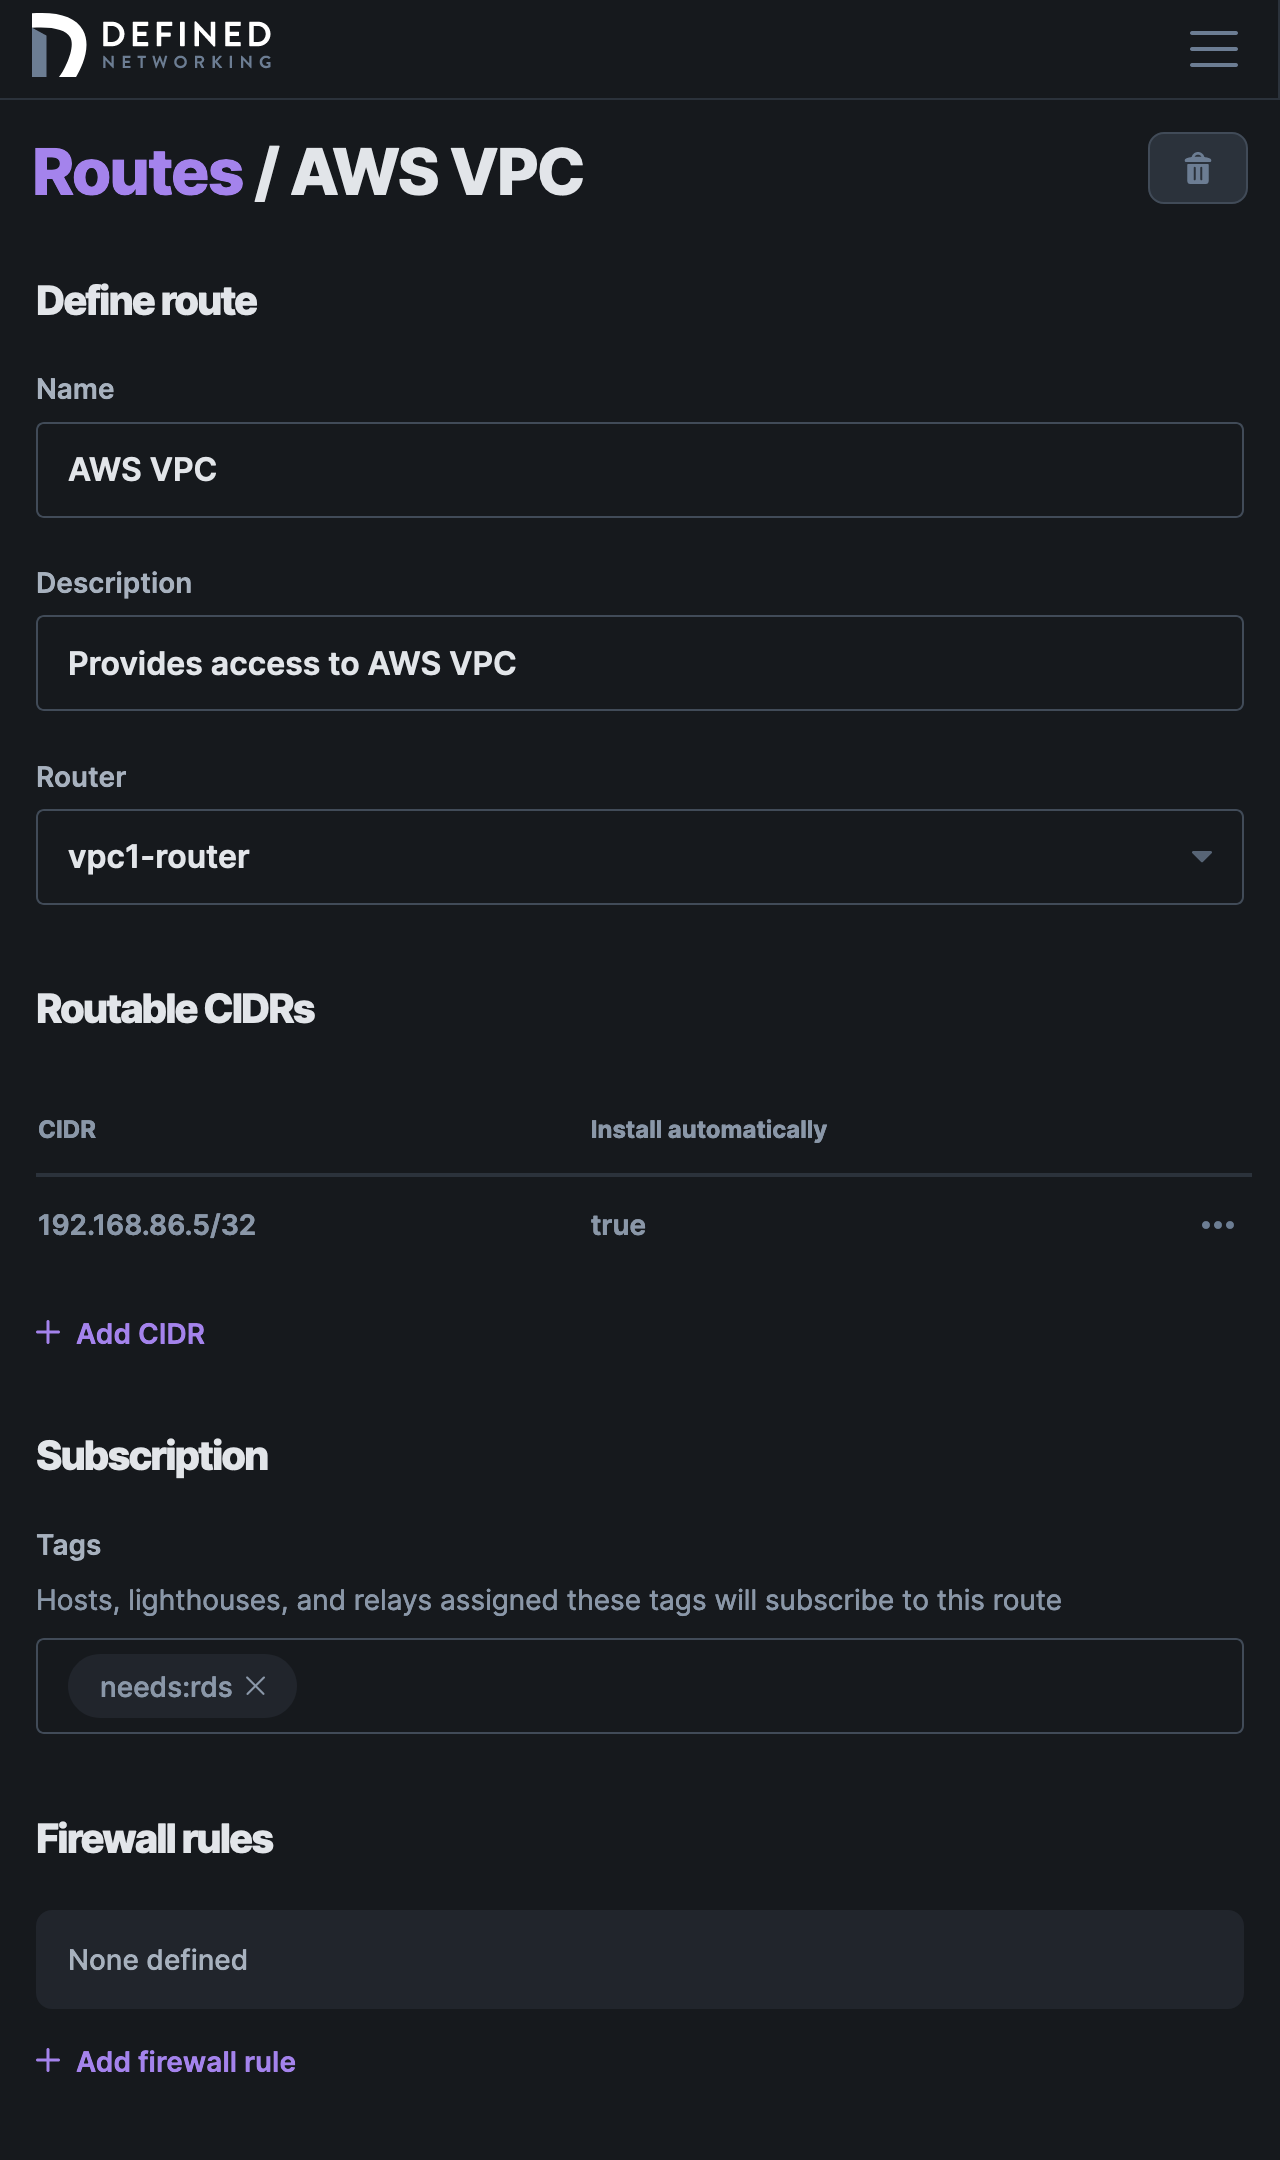 Screenshot of the configured route page, with a name, description, “vpc-router1” selected as the router, a single routable CIDR, and “needs:rds” defined as the only subscribed tag.